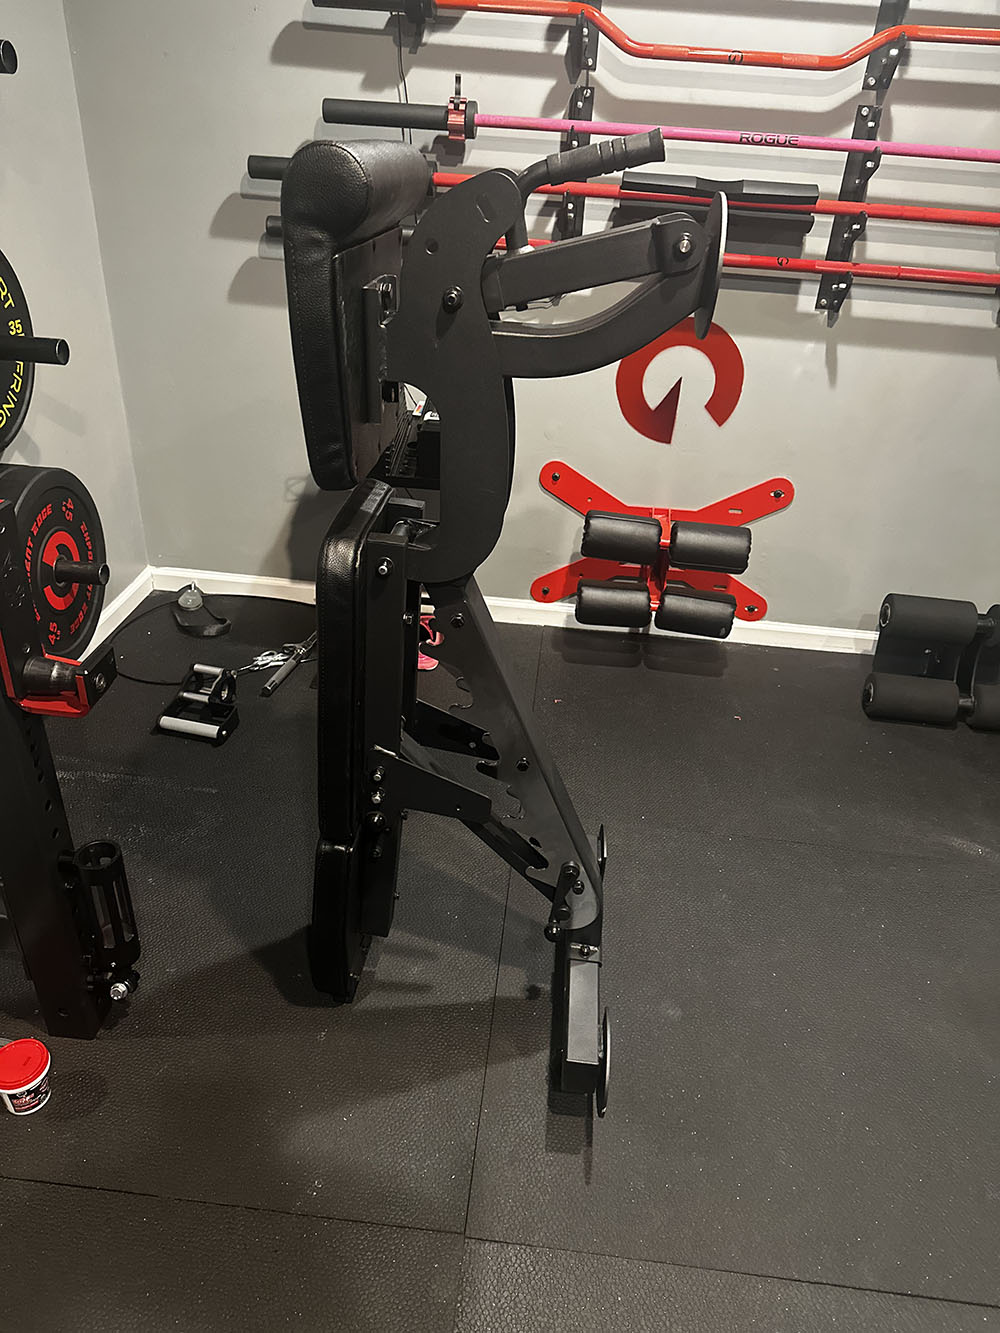 The Edge Infinity Bench is a bench that combines three separate benches all into one bench. You get the benefits of a flat bench, incline bench, and half bench all in one device. As shown in this image, the bench can be stored vertically to maximize space. 